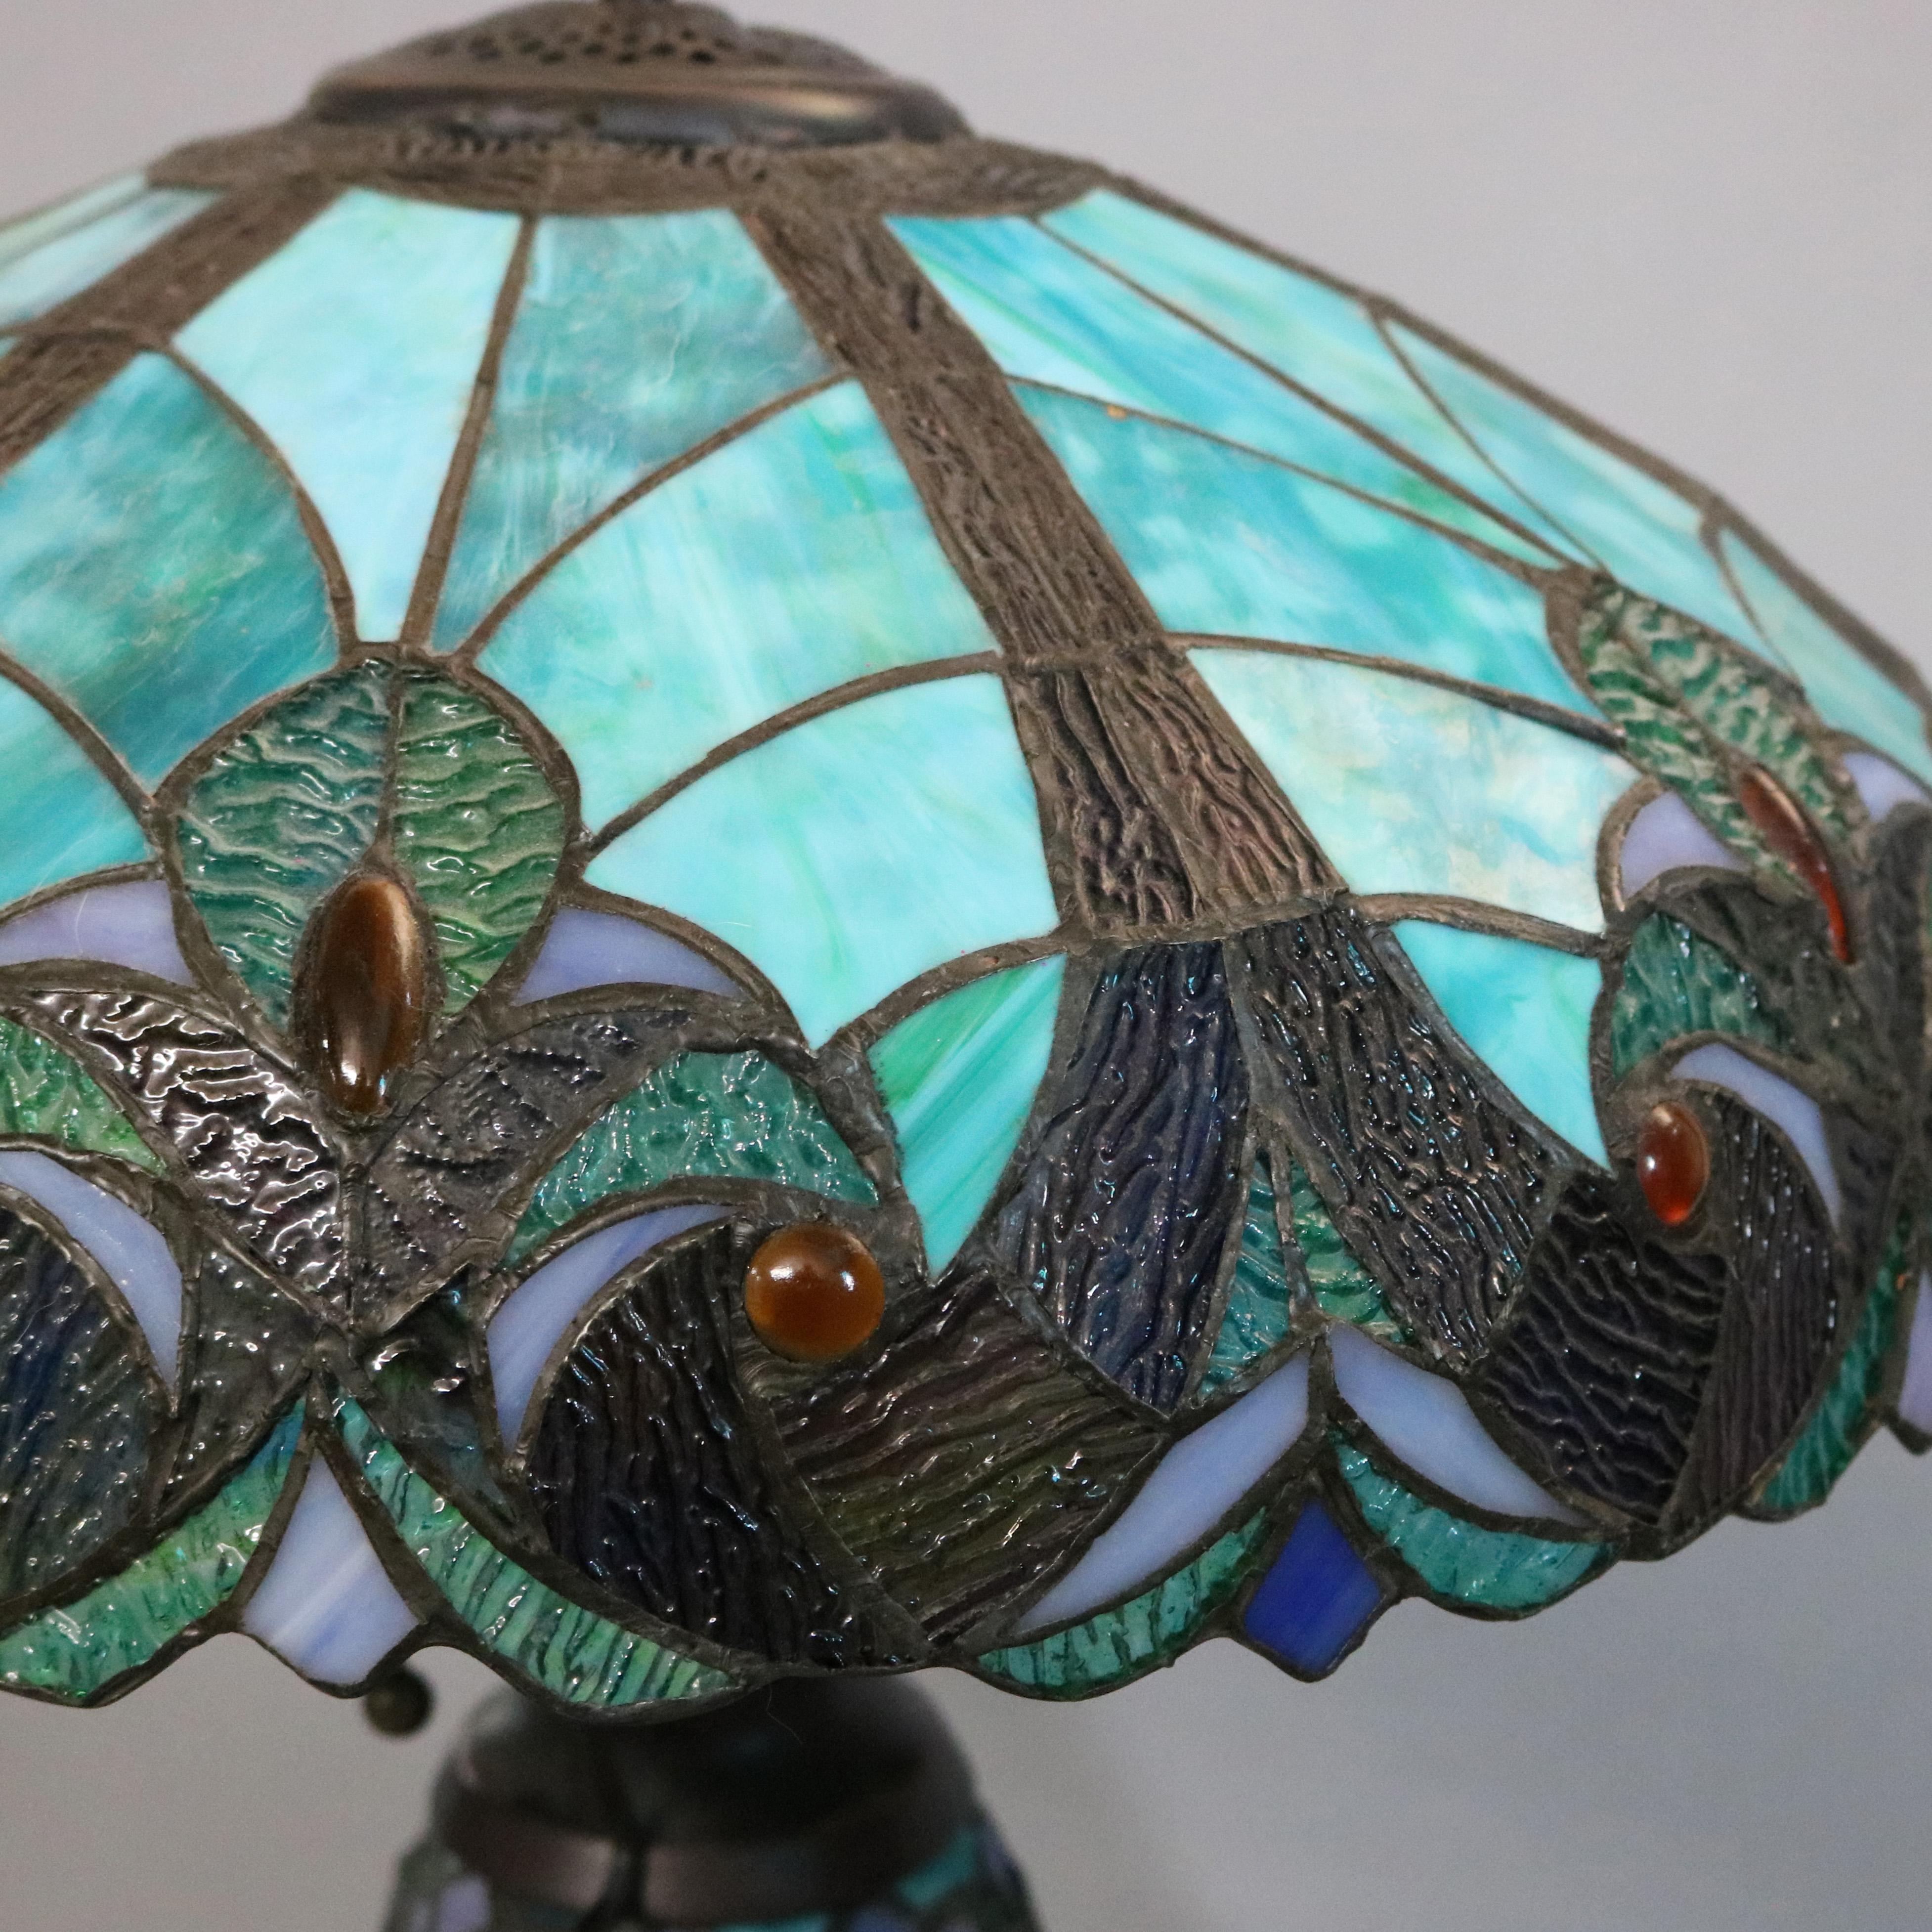 American Vintage Arts & Crafts Leaded Slag and Jeweled Glass Tiffany Style Mosaic Lamp